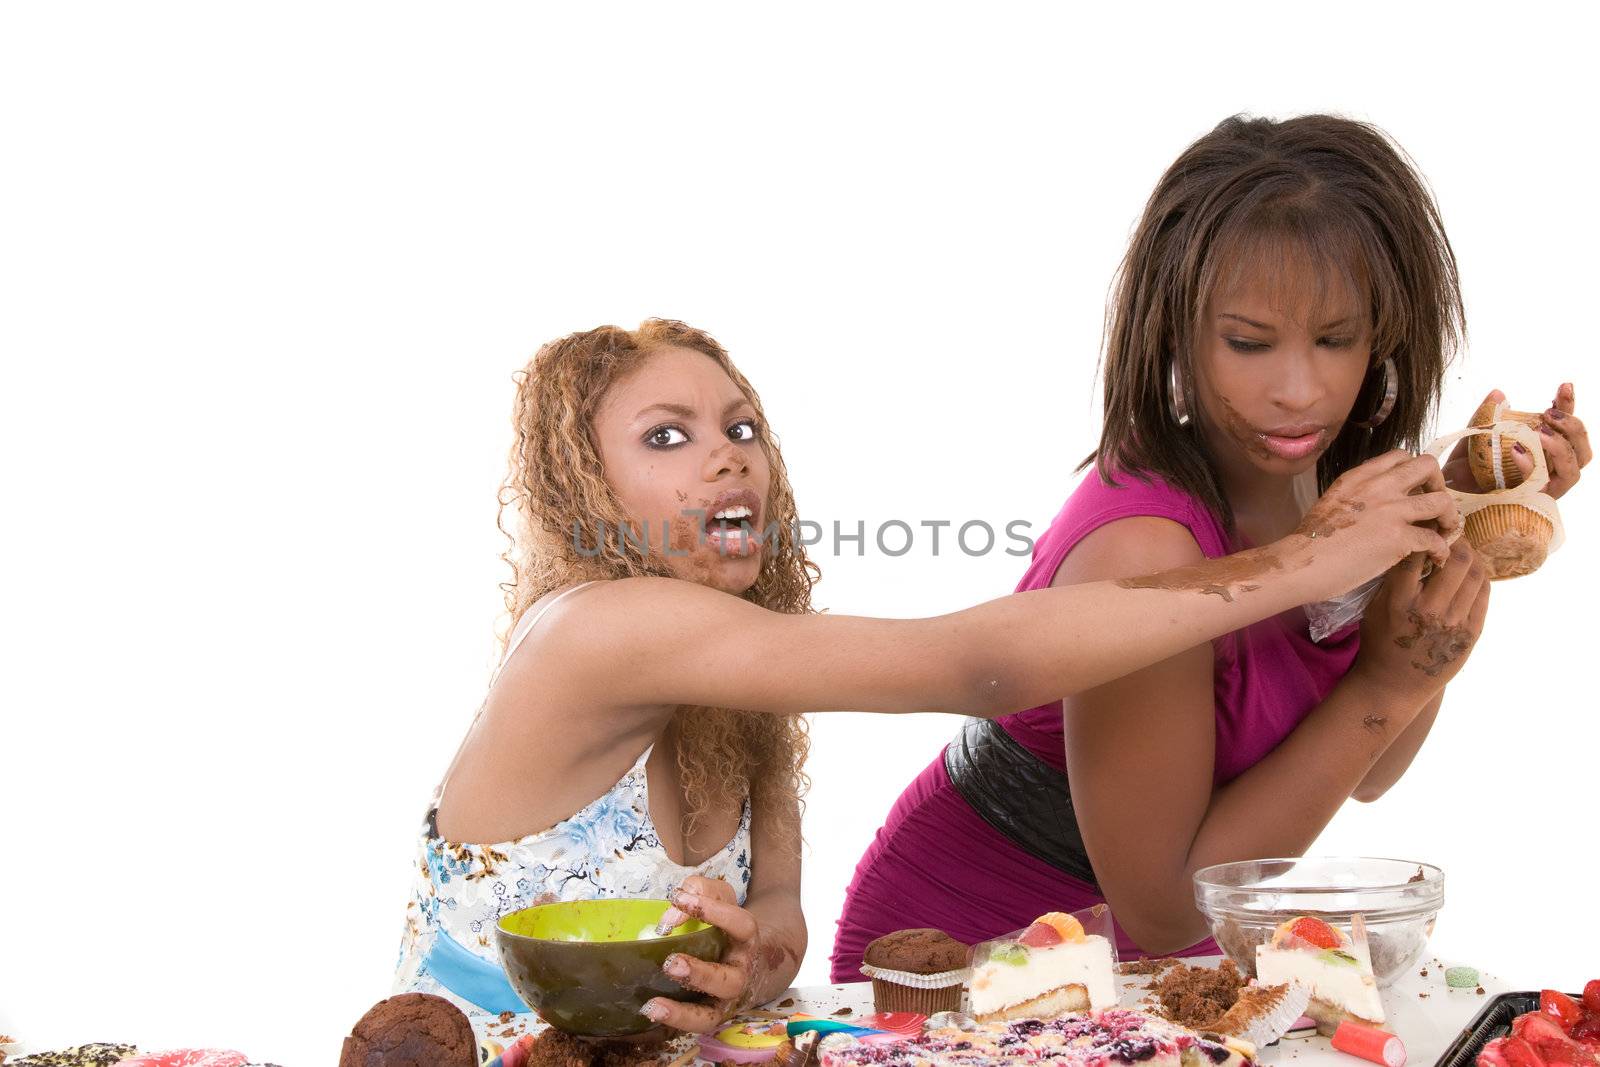 Two black girls fighting over a bunch of muffins while the entire table in front of them is loaded with food